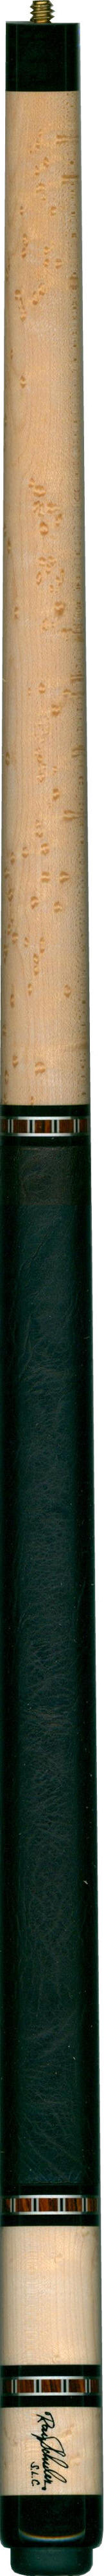 Ray Schuler PL-4 Pool Cue